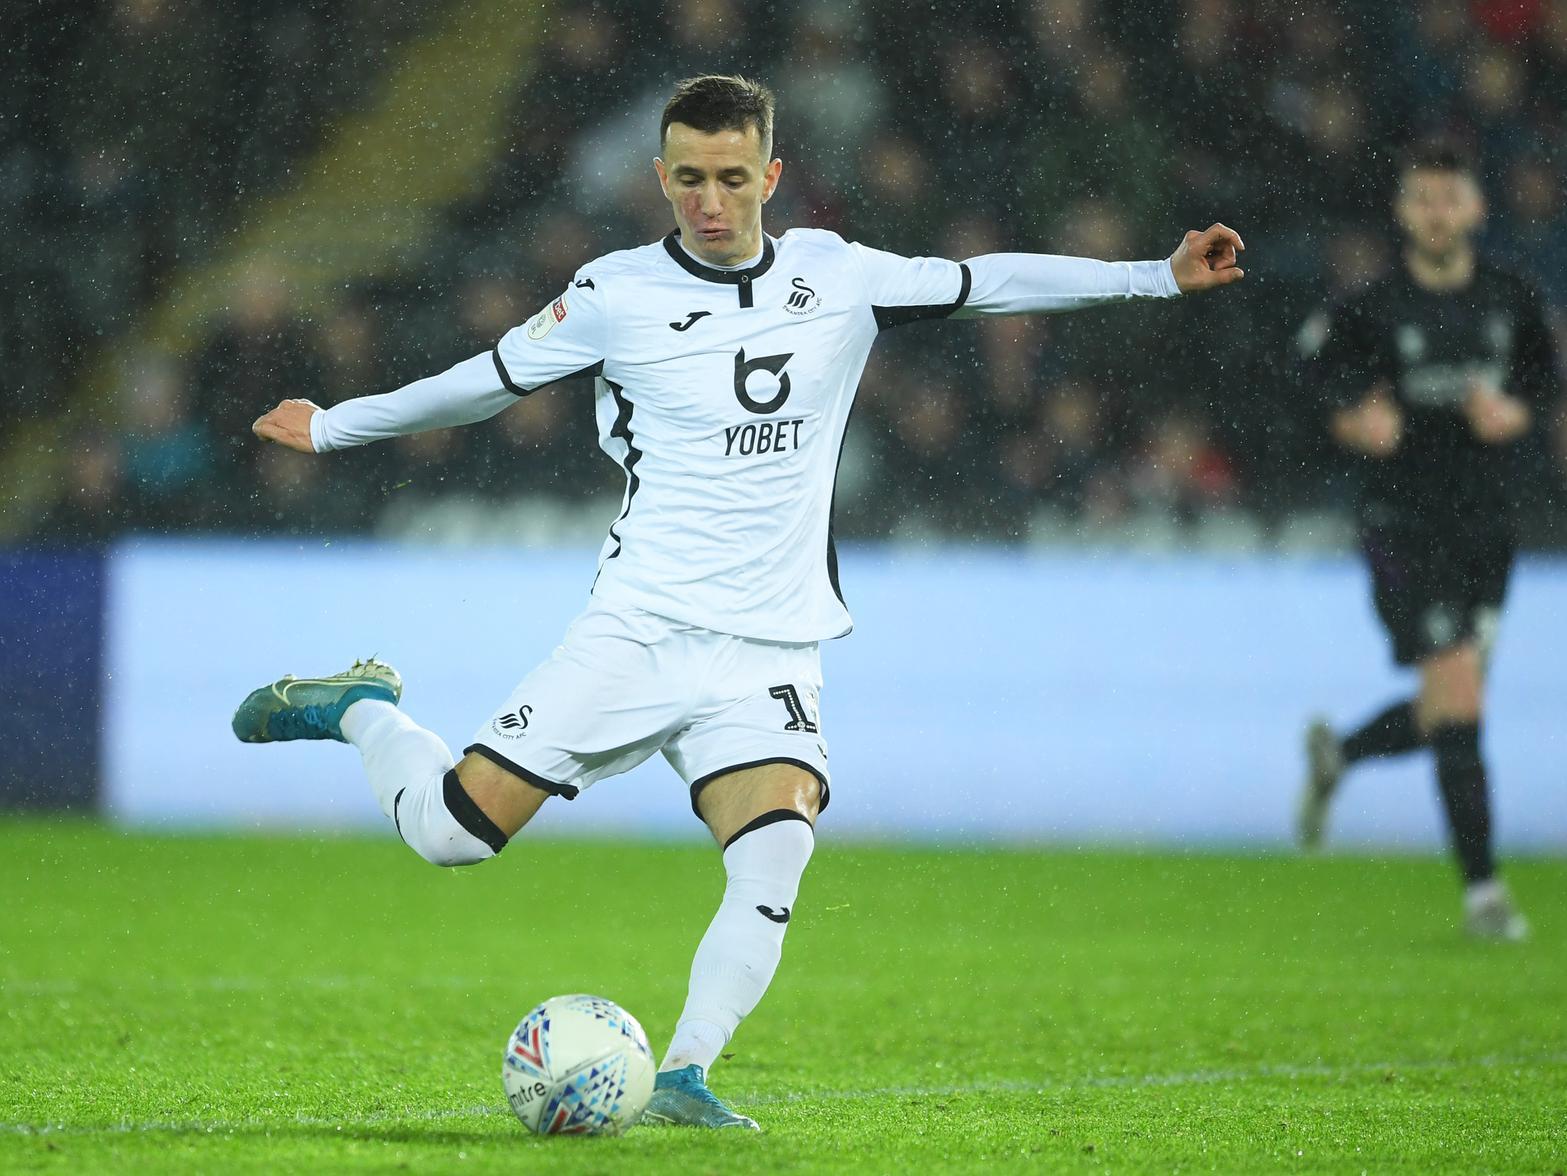 Brighton boss Graham Potter is said to be plotting a raid of his former club Swansea City, as he looks to snap up their 10 million-rated midfielder Bersant Celina. (Wales Online)